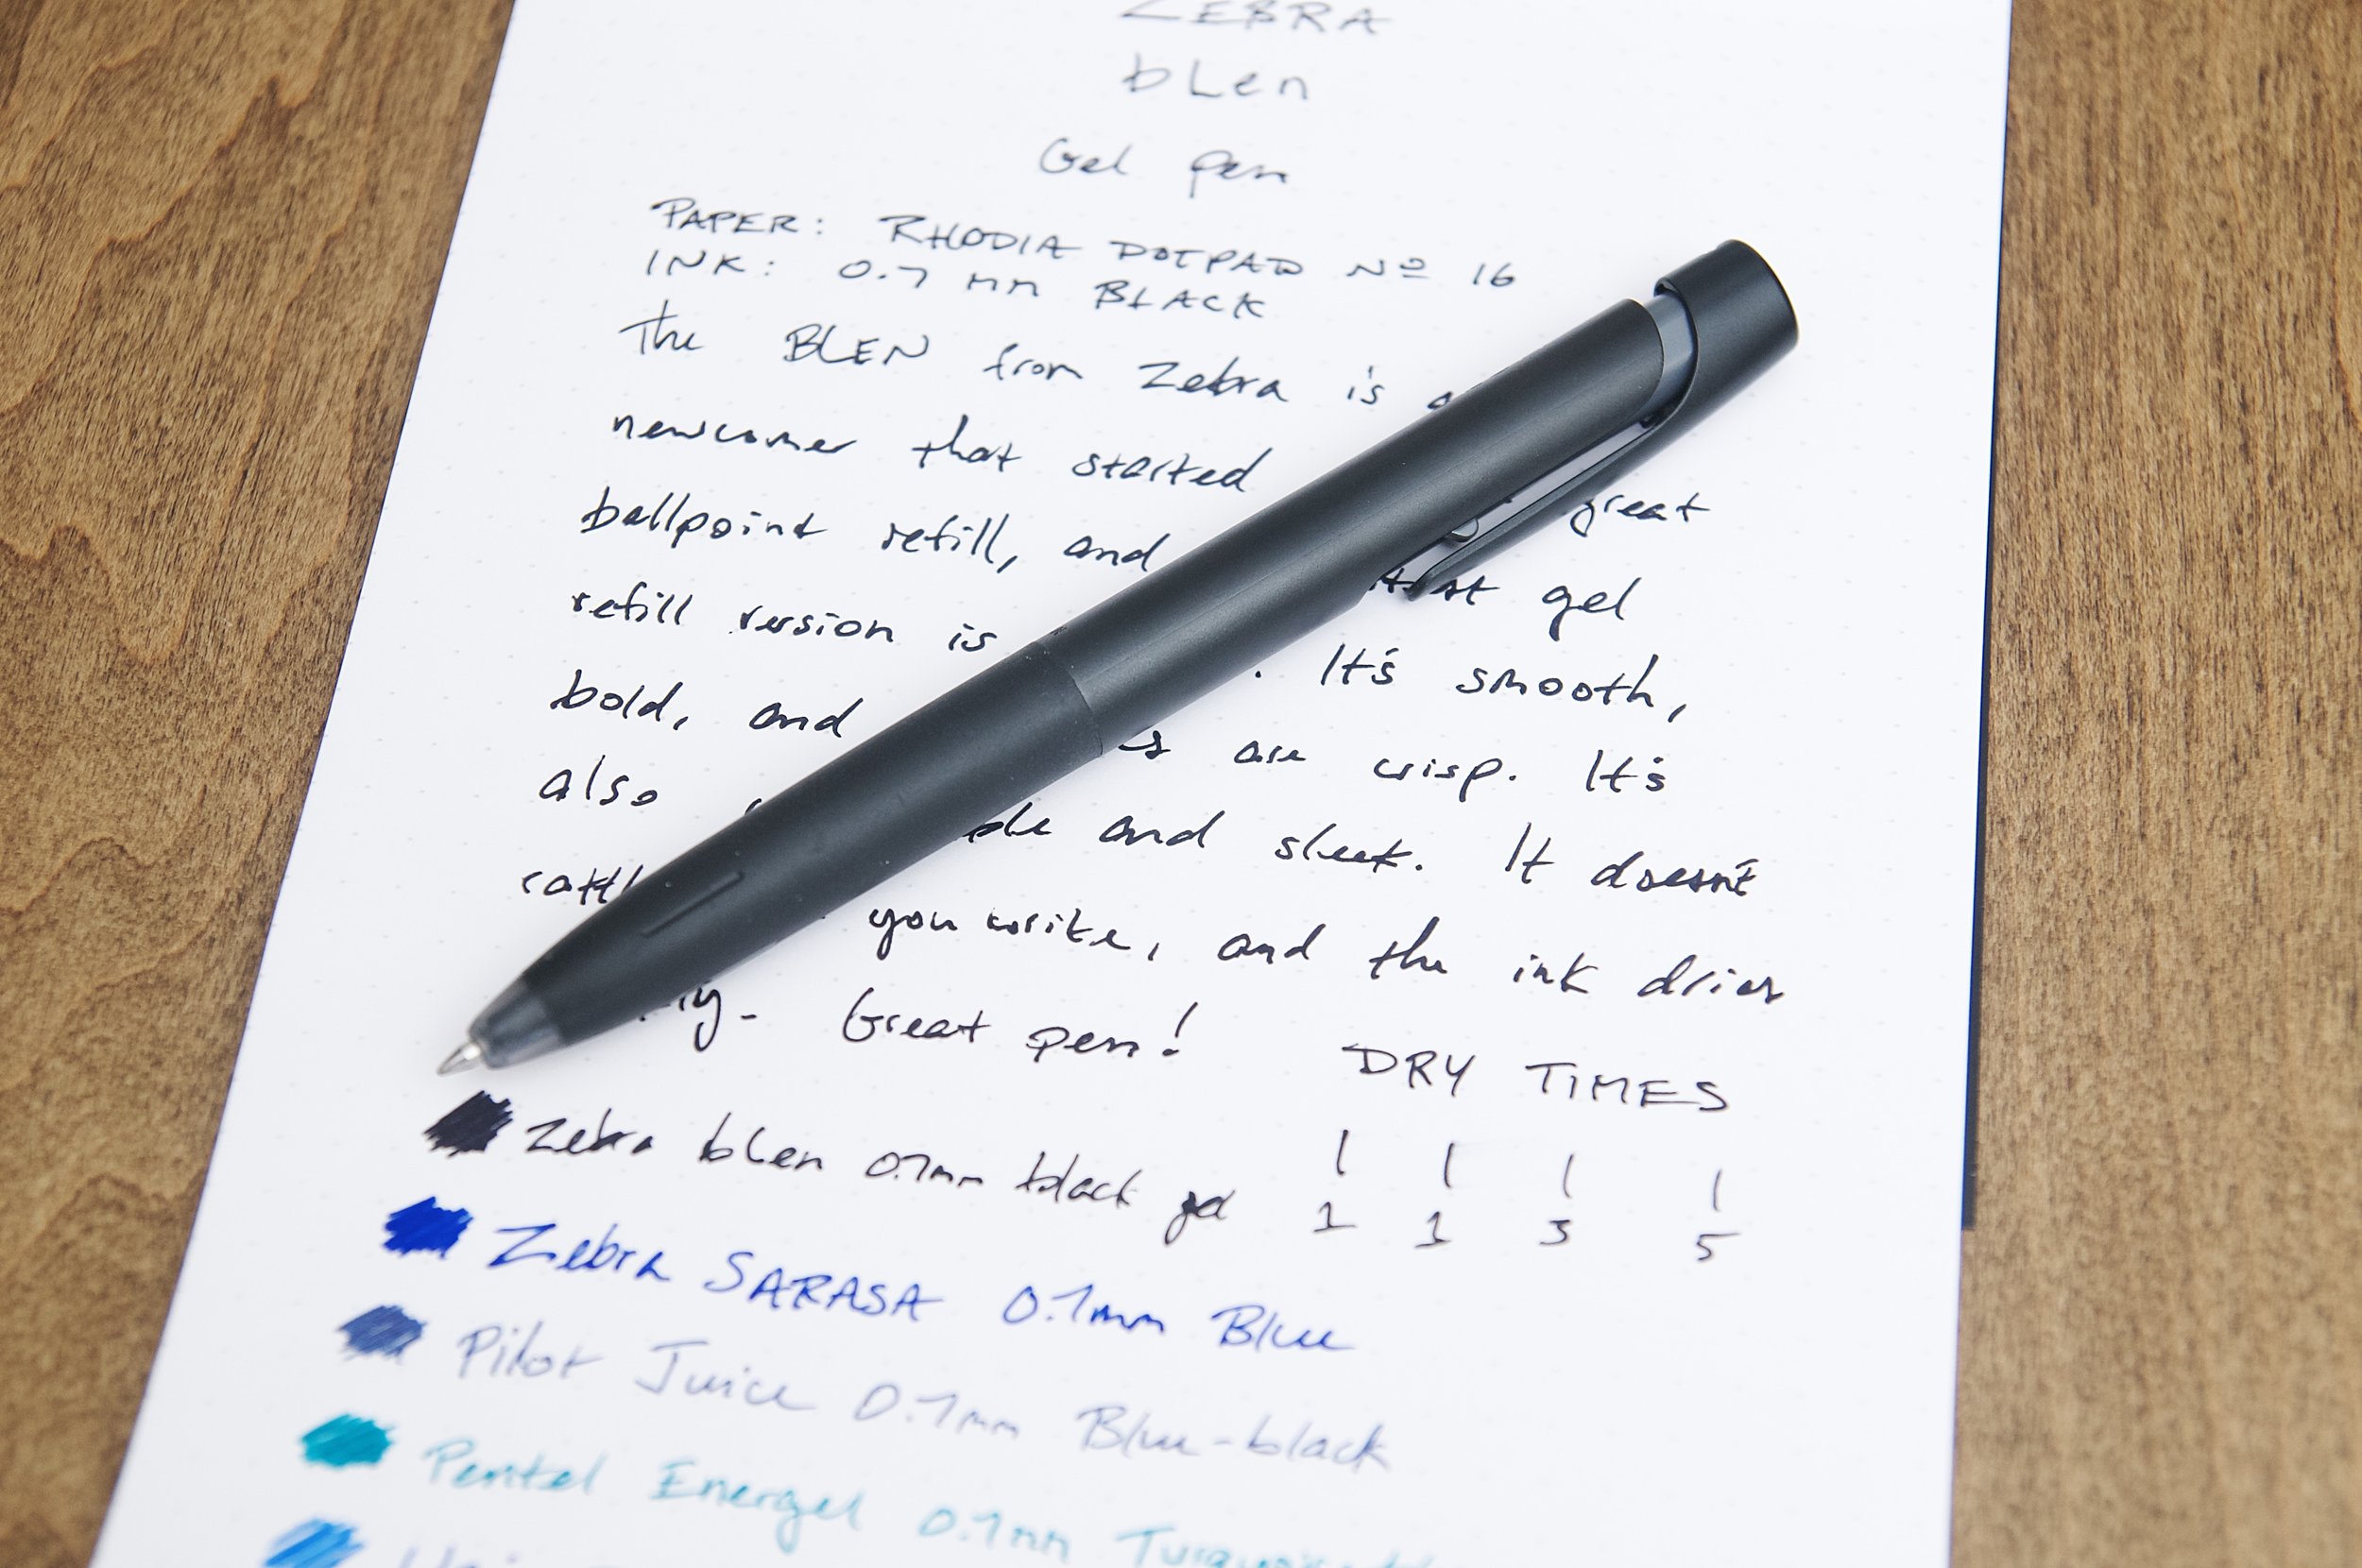 4 Reasons to Keep Writing with a Pen and Paper – Zebra Pen